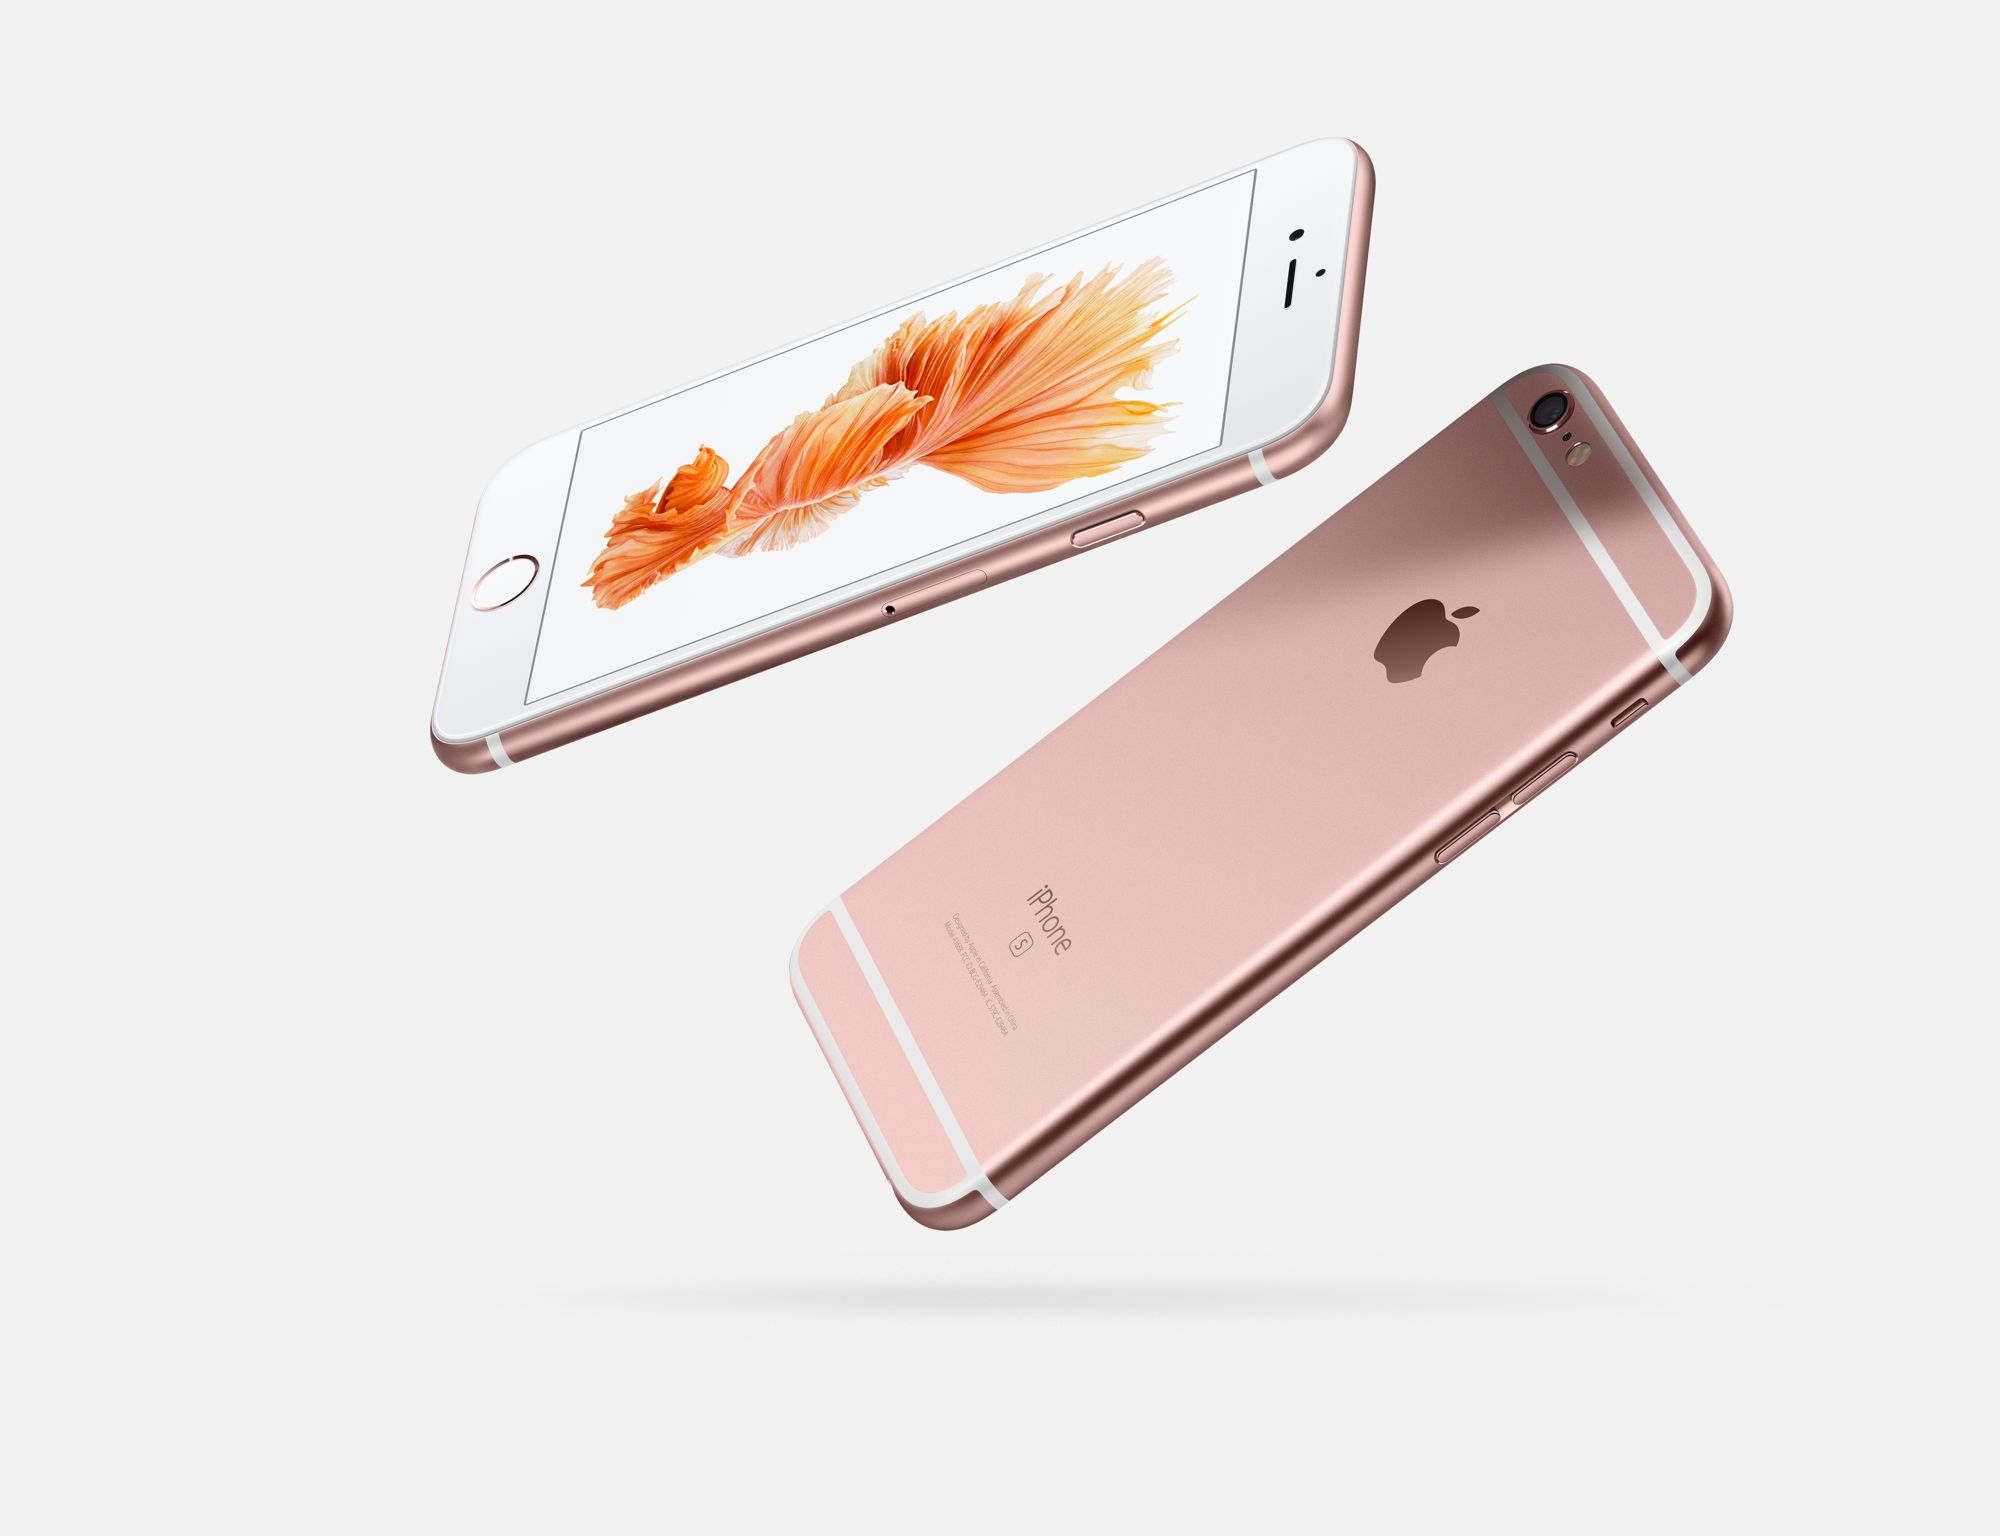 iPhone 6s (32GB, Space Gray)